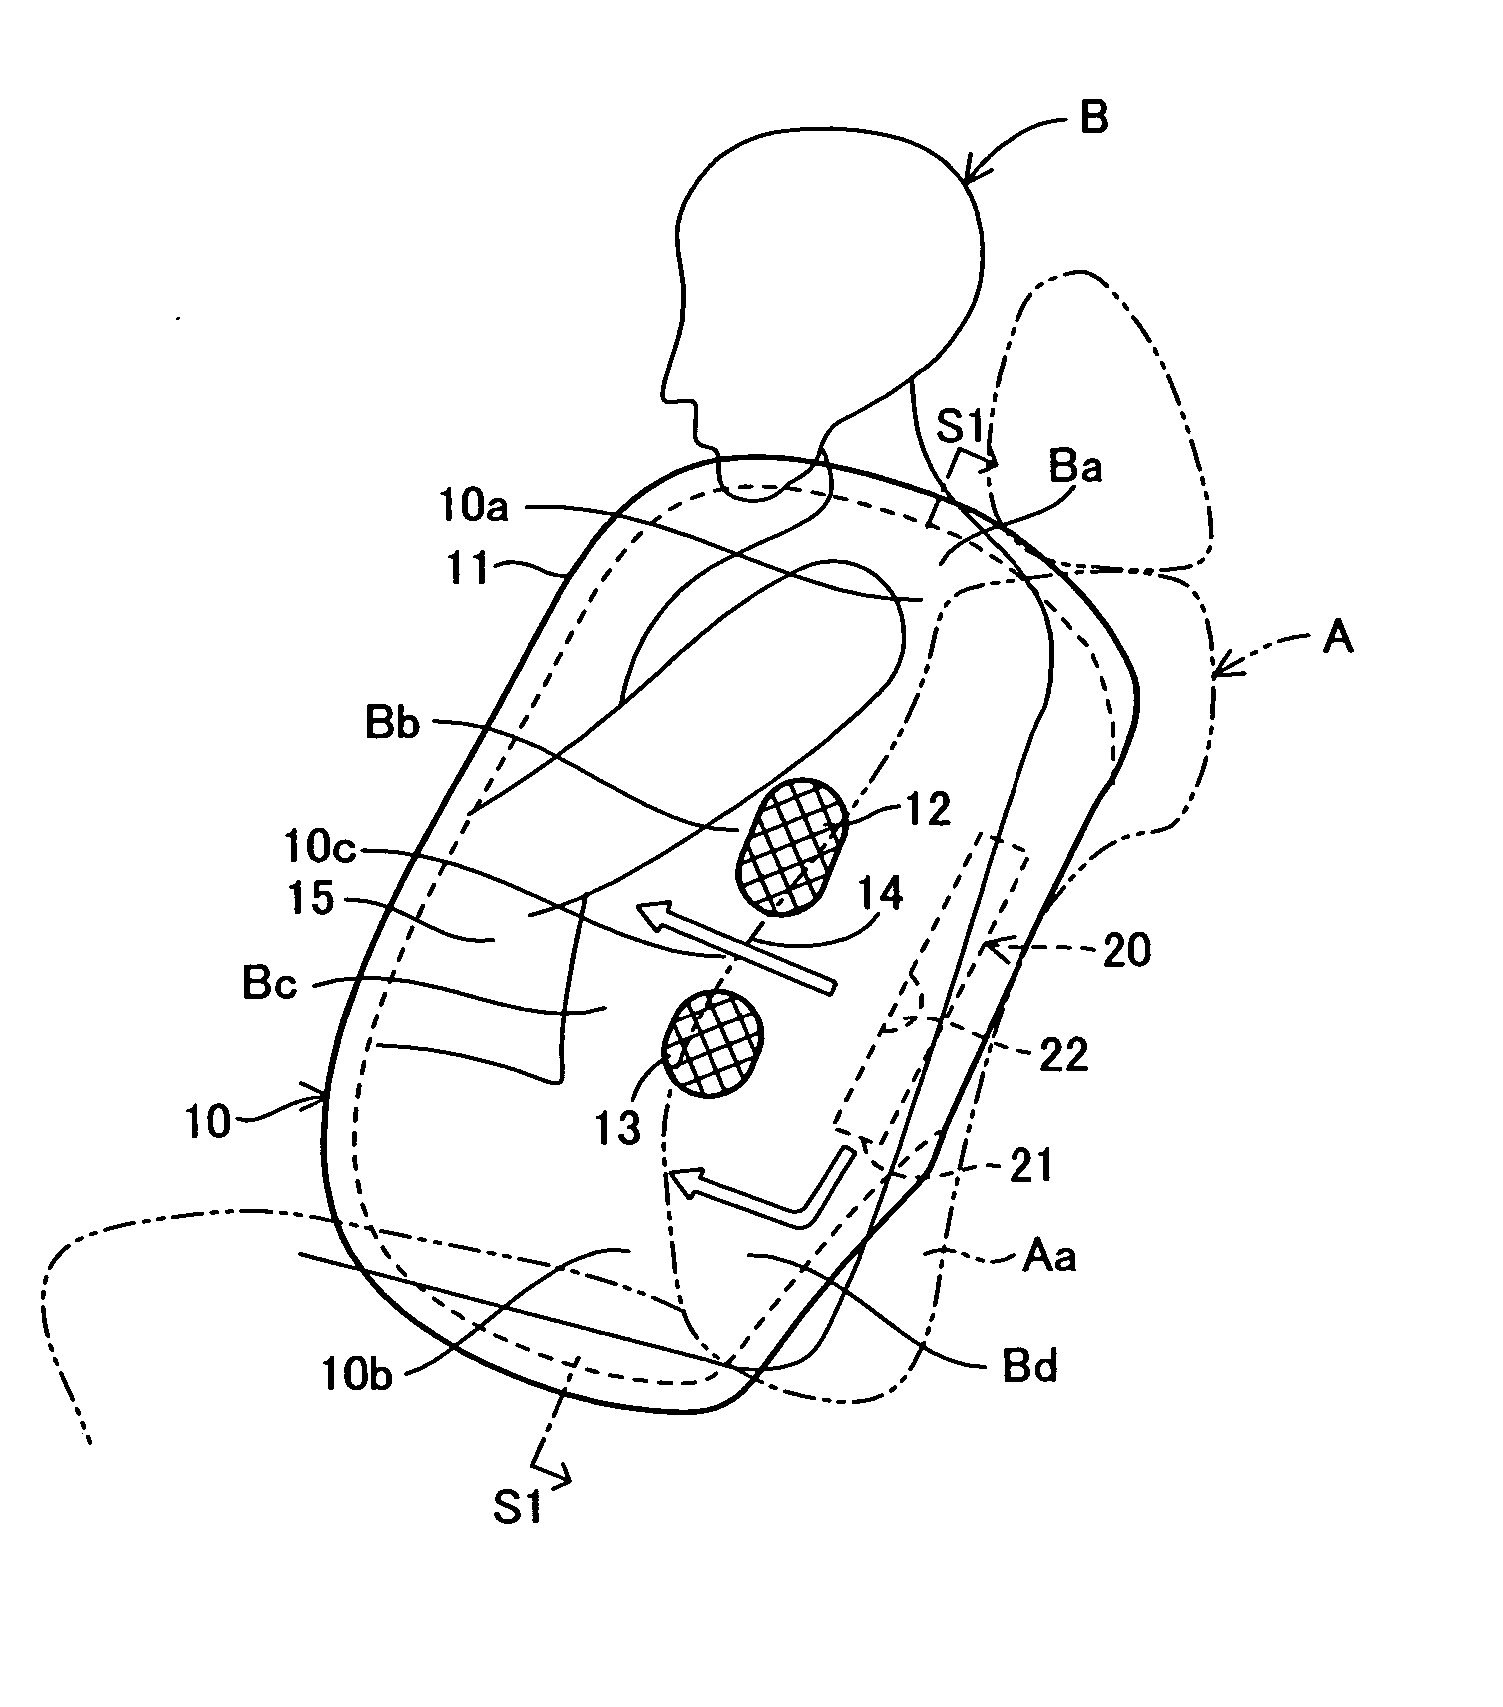 Vehicle occupant production device